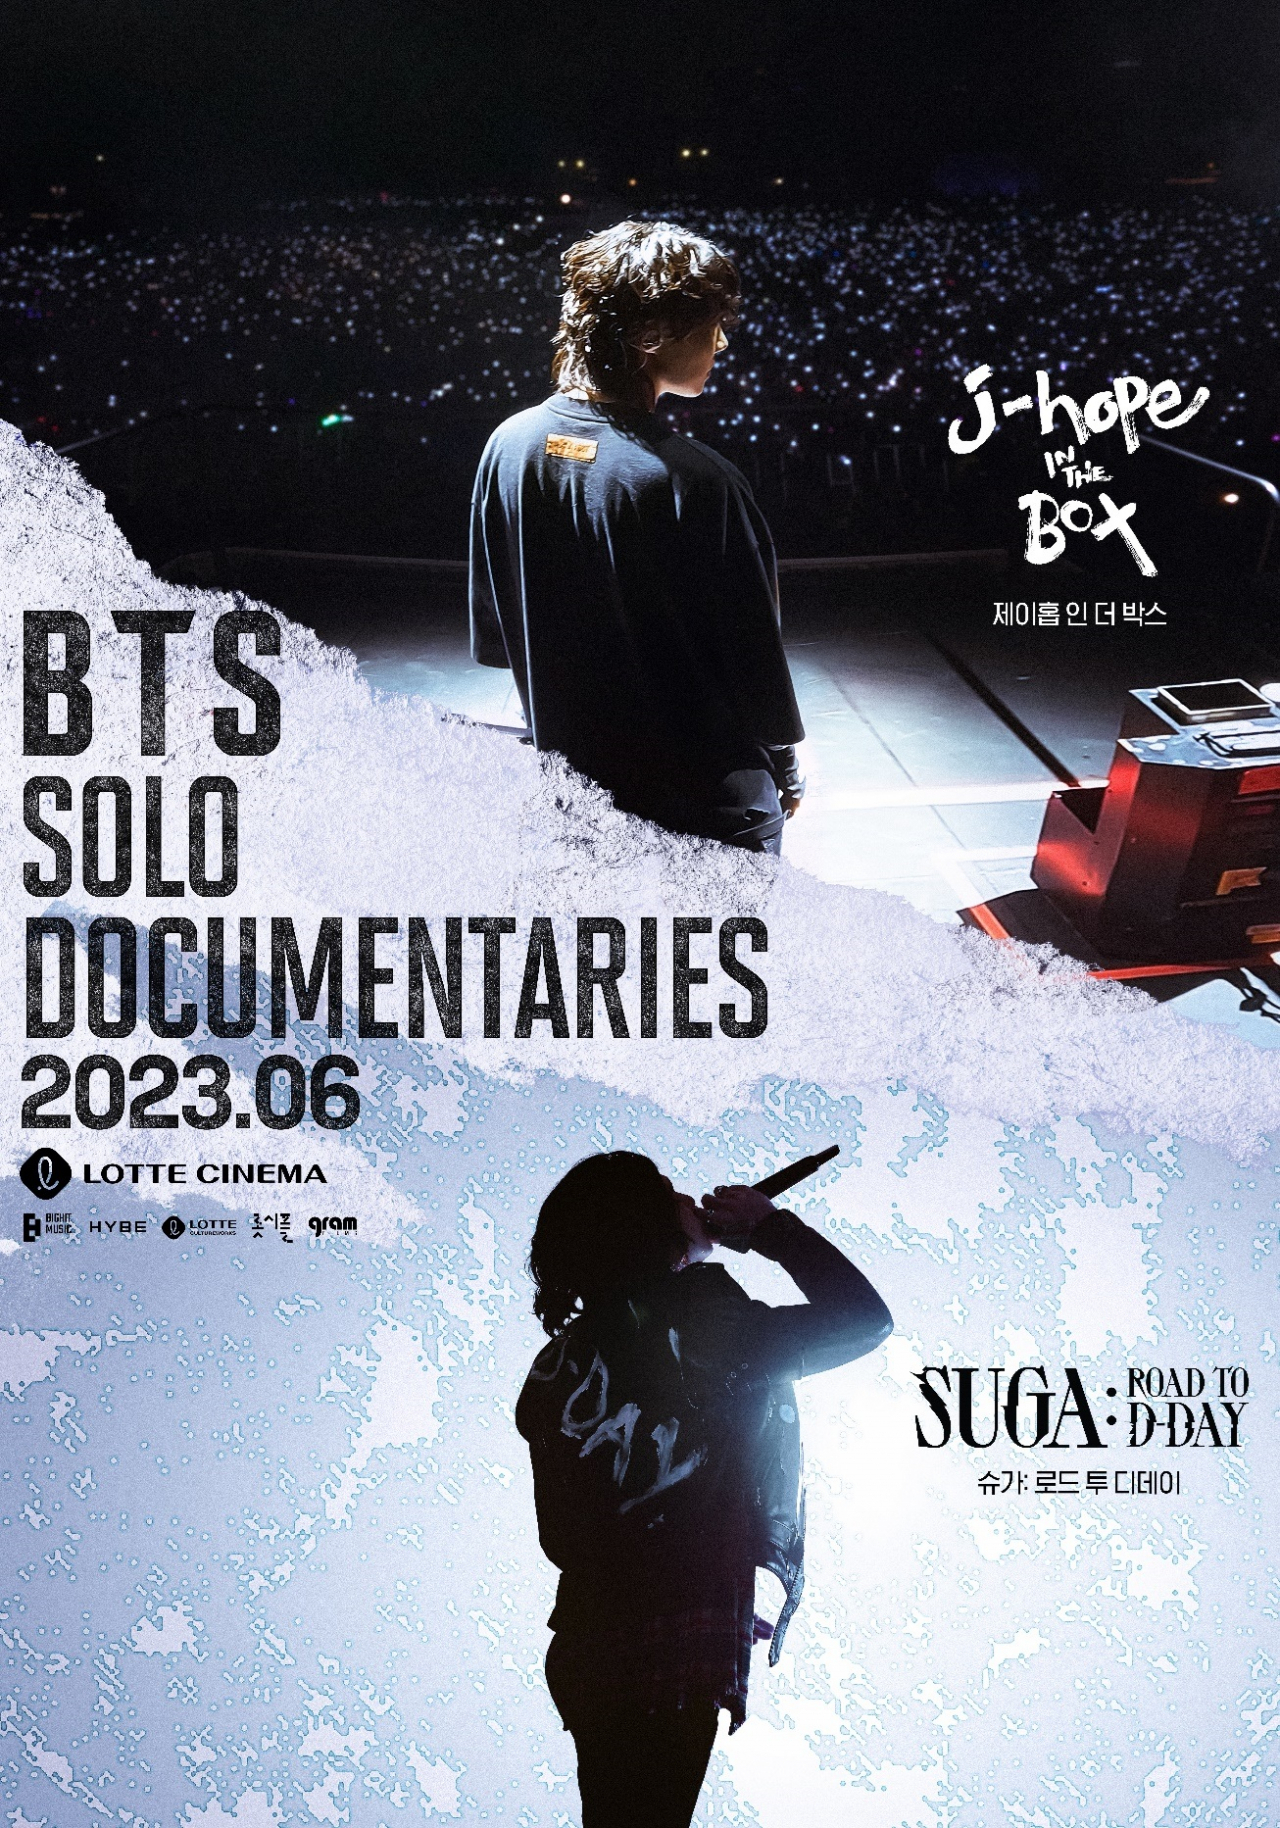 A poster for BTS' solo documentaries, 